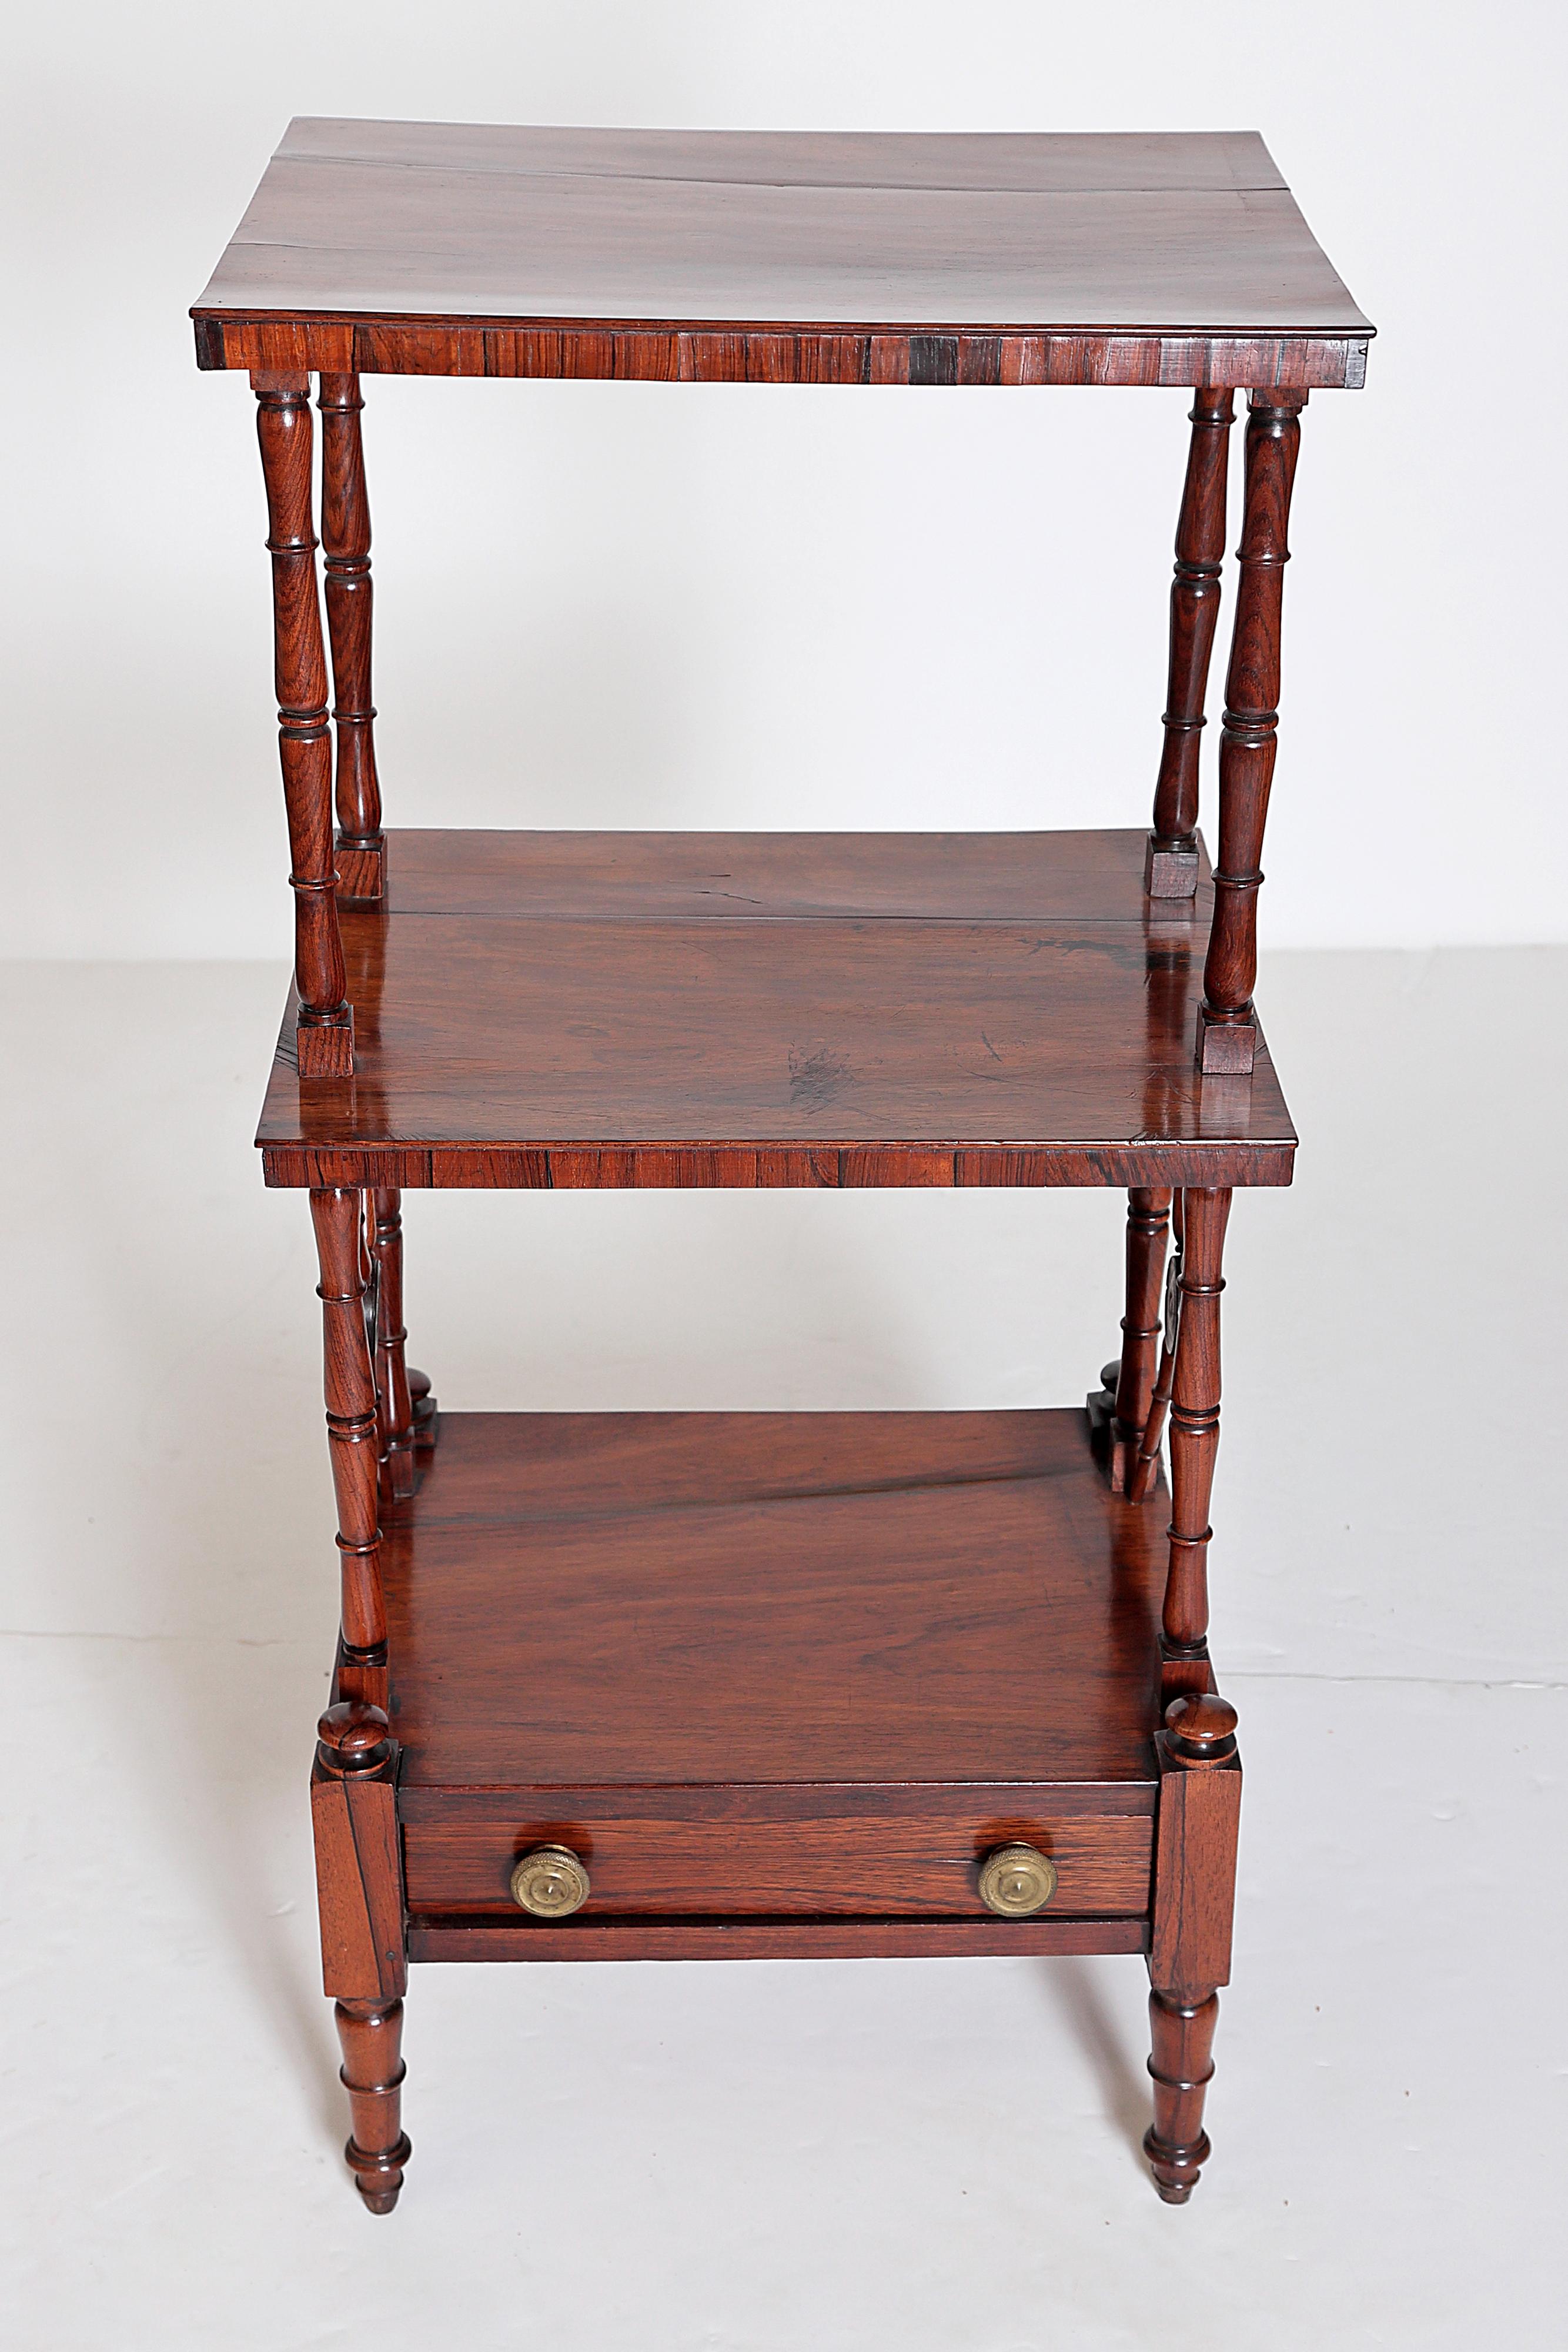 Hand-Crafted An English Regency Rosewood 3-Tiered Whatnot